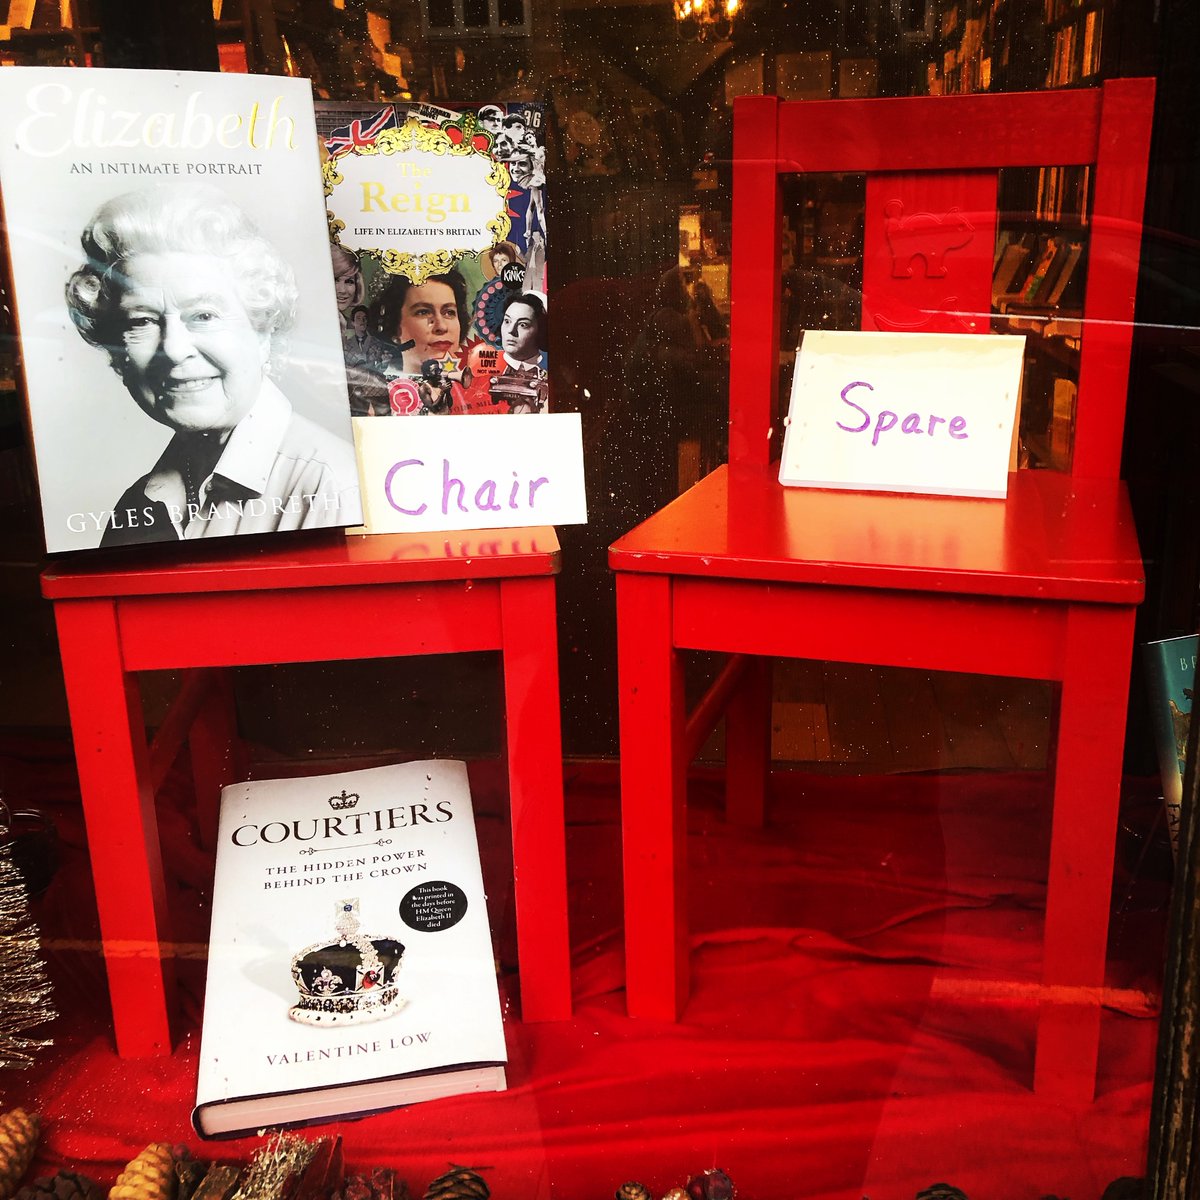 What with all the news coverage, we felt we had to put *something* in the window. Several customers popped in to let us know it tickled them. Come and find something to love amongst all the books we do have in stock!
#HelloWinchester #IndependentBookshop